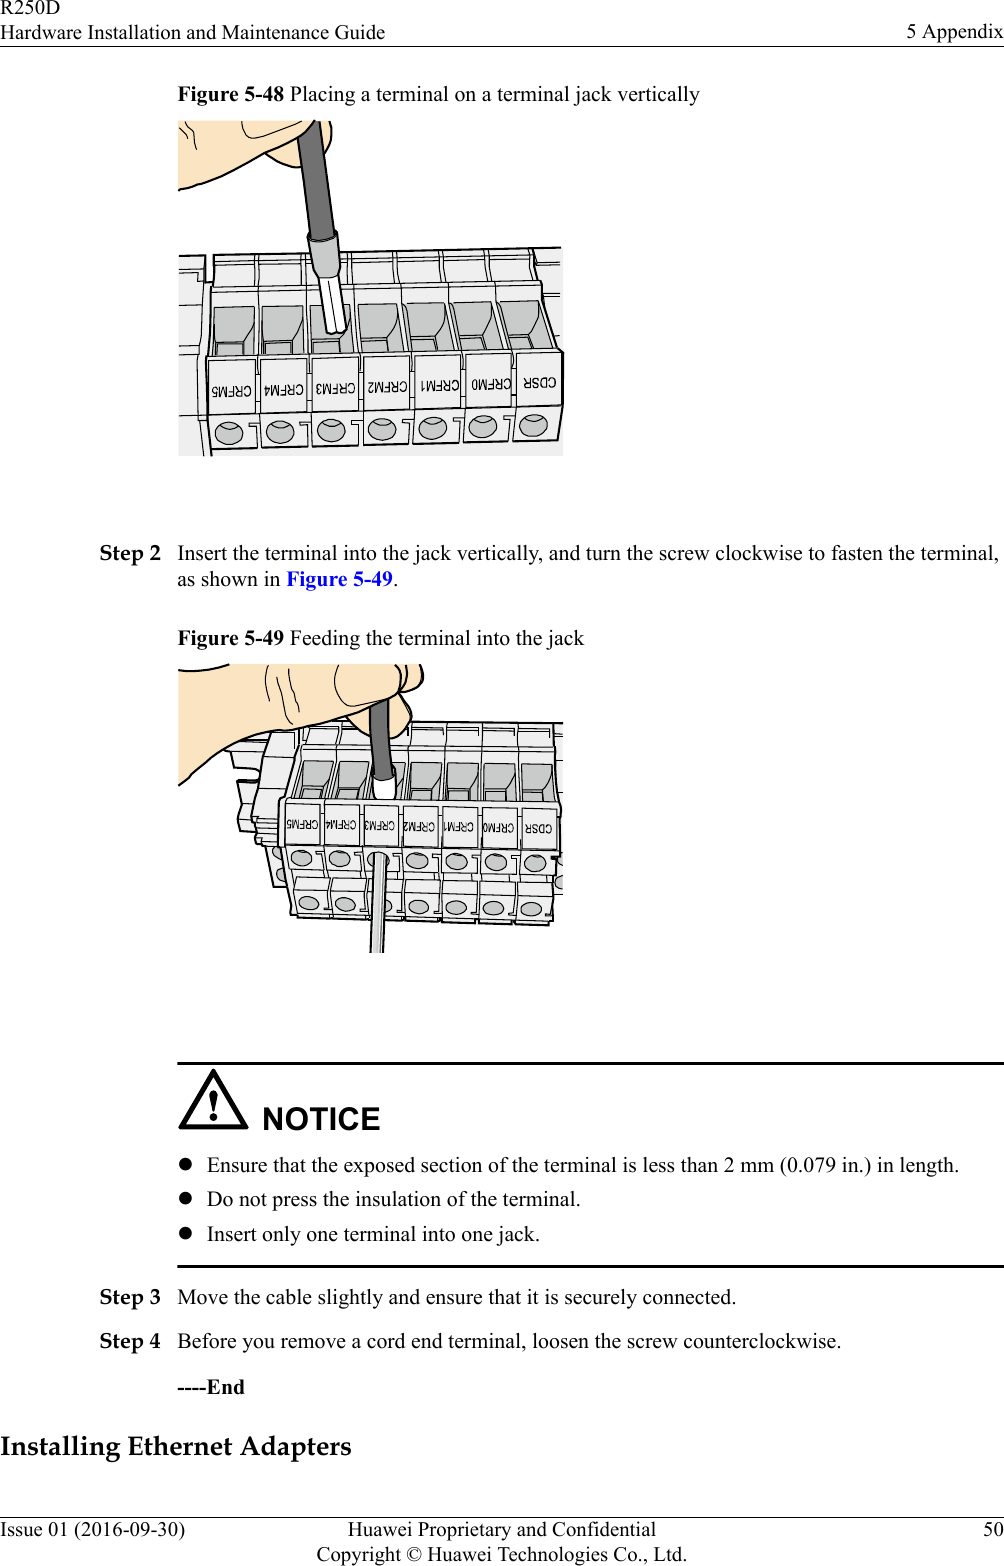 Figure 5-48 Placing a terminal on a terminal jack vertically Step 2 Insert the terminal into the jack vertically, and turn the screw clockwise to fasten the terminal,as shown in Figure 5-49.Figure 5-49 Feeding the terminal into the jack NOTICElEnsure that the exposed section of the terminal is less than 2 mm (0.079 in.) in length.lDo not press the insulation of the terminal.lInsert only one terminal into one jack.Step 3 Move the cable slightly and ensure that it is securely connected.Step 4 Before you remove a cord end terminal, loosen the screw counterclockwise.----EndInstalling Ethernet AdaptersR250DHardware Installation and Maintenance Guide 5 AppendixIssue 01 (2016-09-30) Huawei Proprietary and ConfidentialCopyright © Huawei Technologies Co., Ltd.50